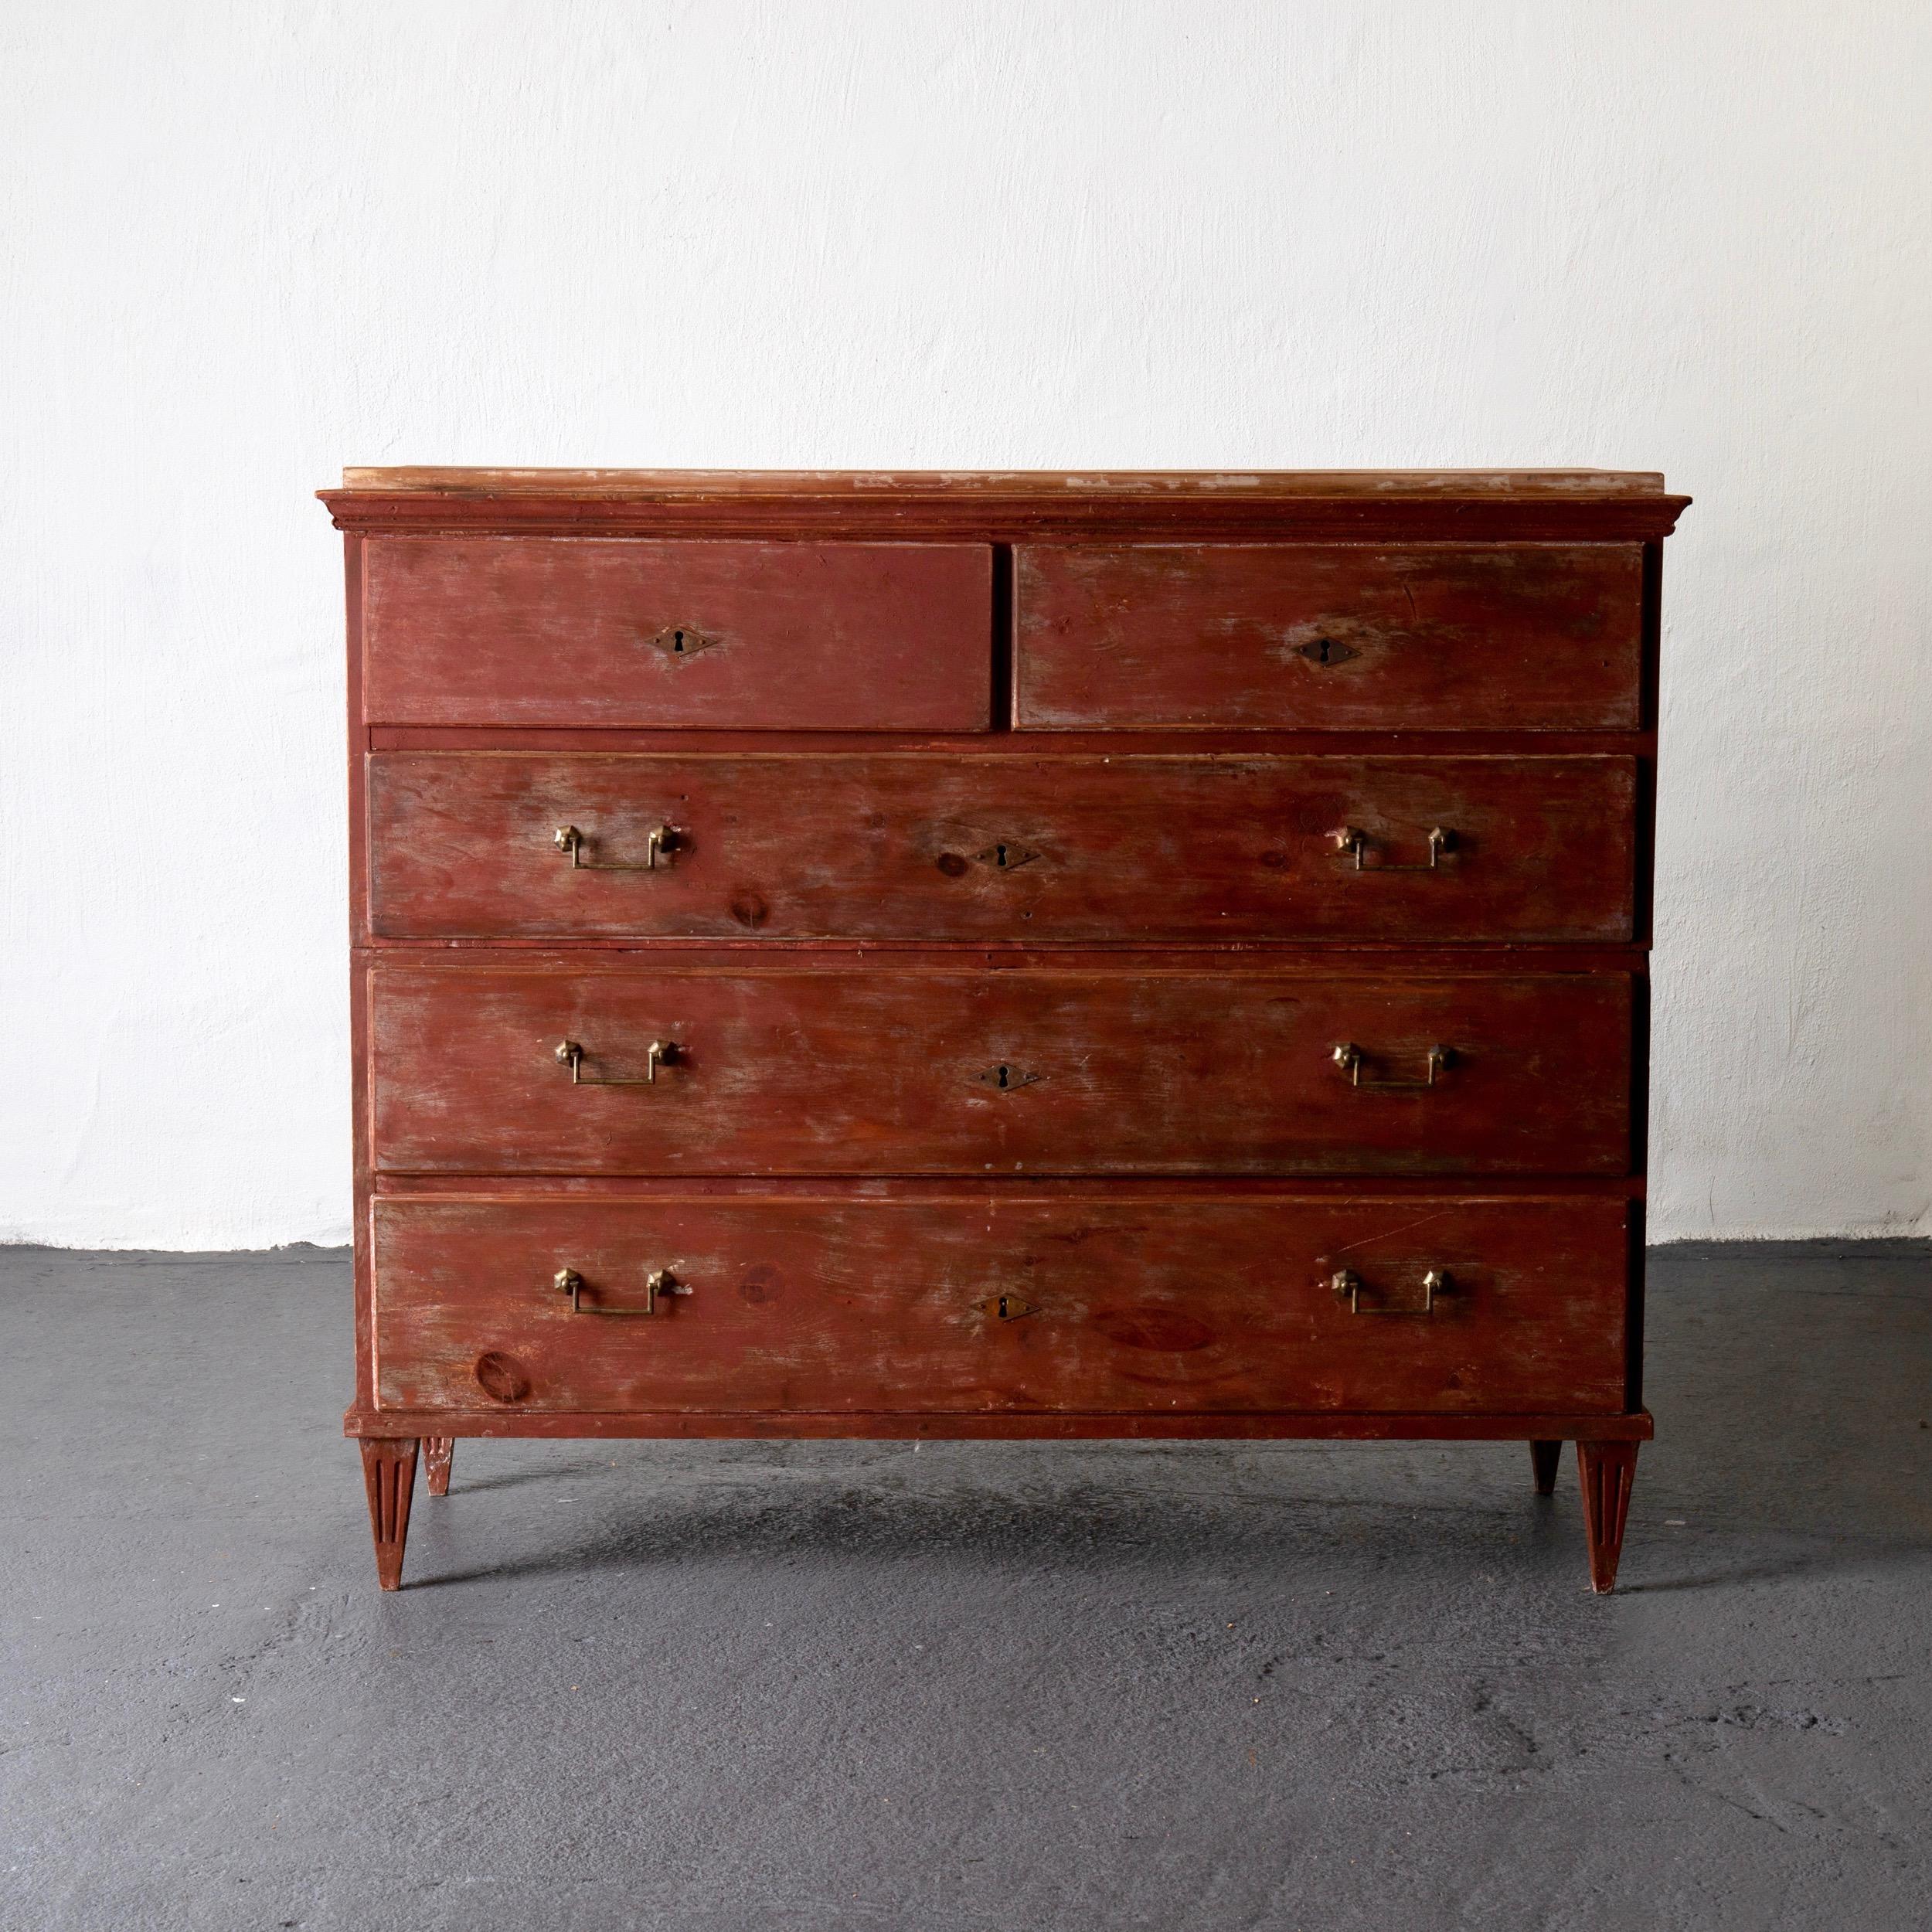 Chest of drawer dresser Gustavian Swedish red rustic, Sweden. A dresser made during the Gustavian period in Sweden. Painted in a reddish finish with a rustic look. Brass hardware. Tapered and channeled legs.